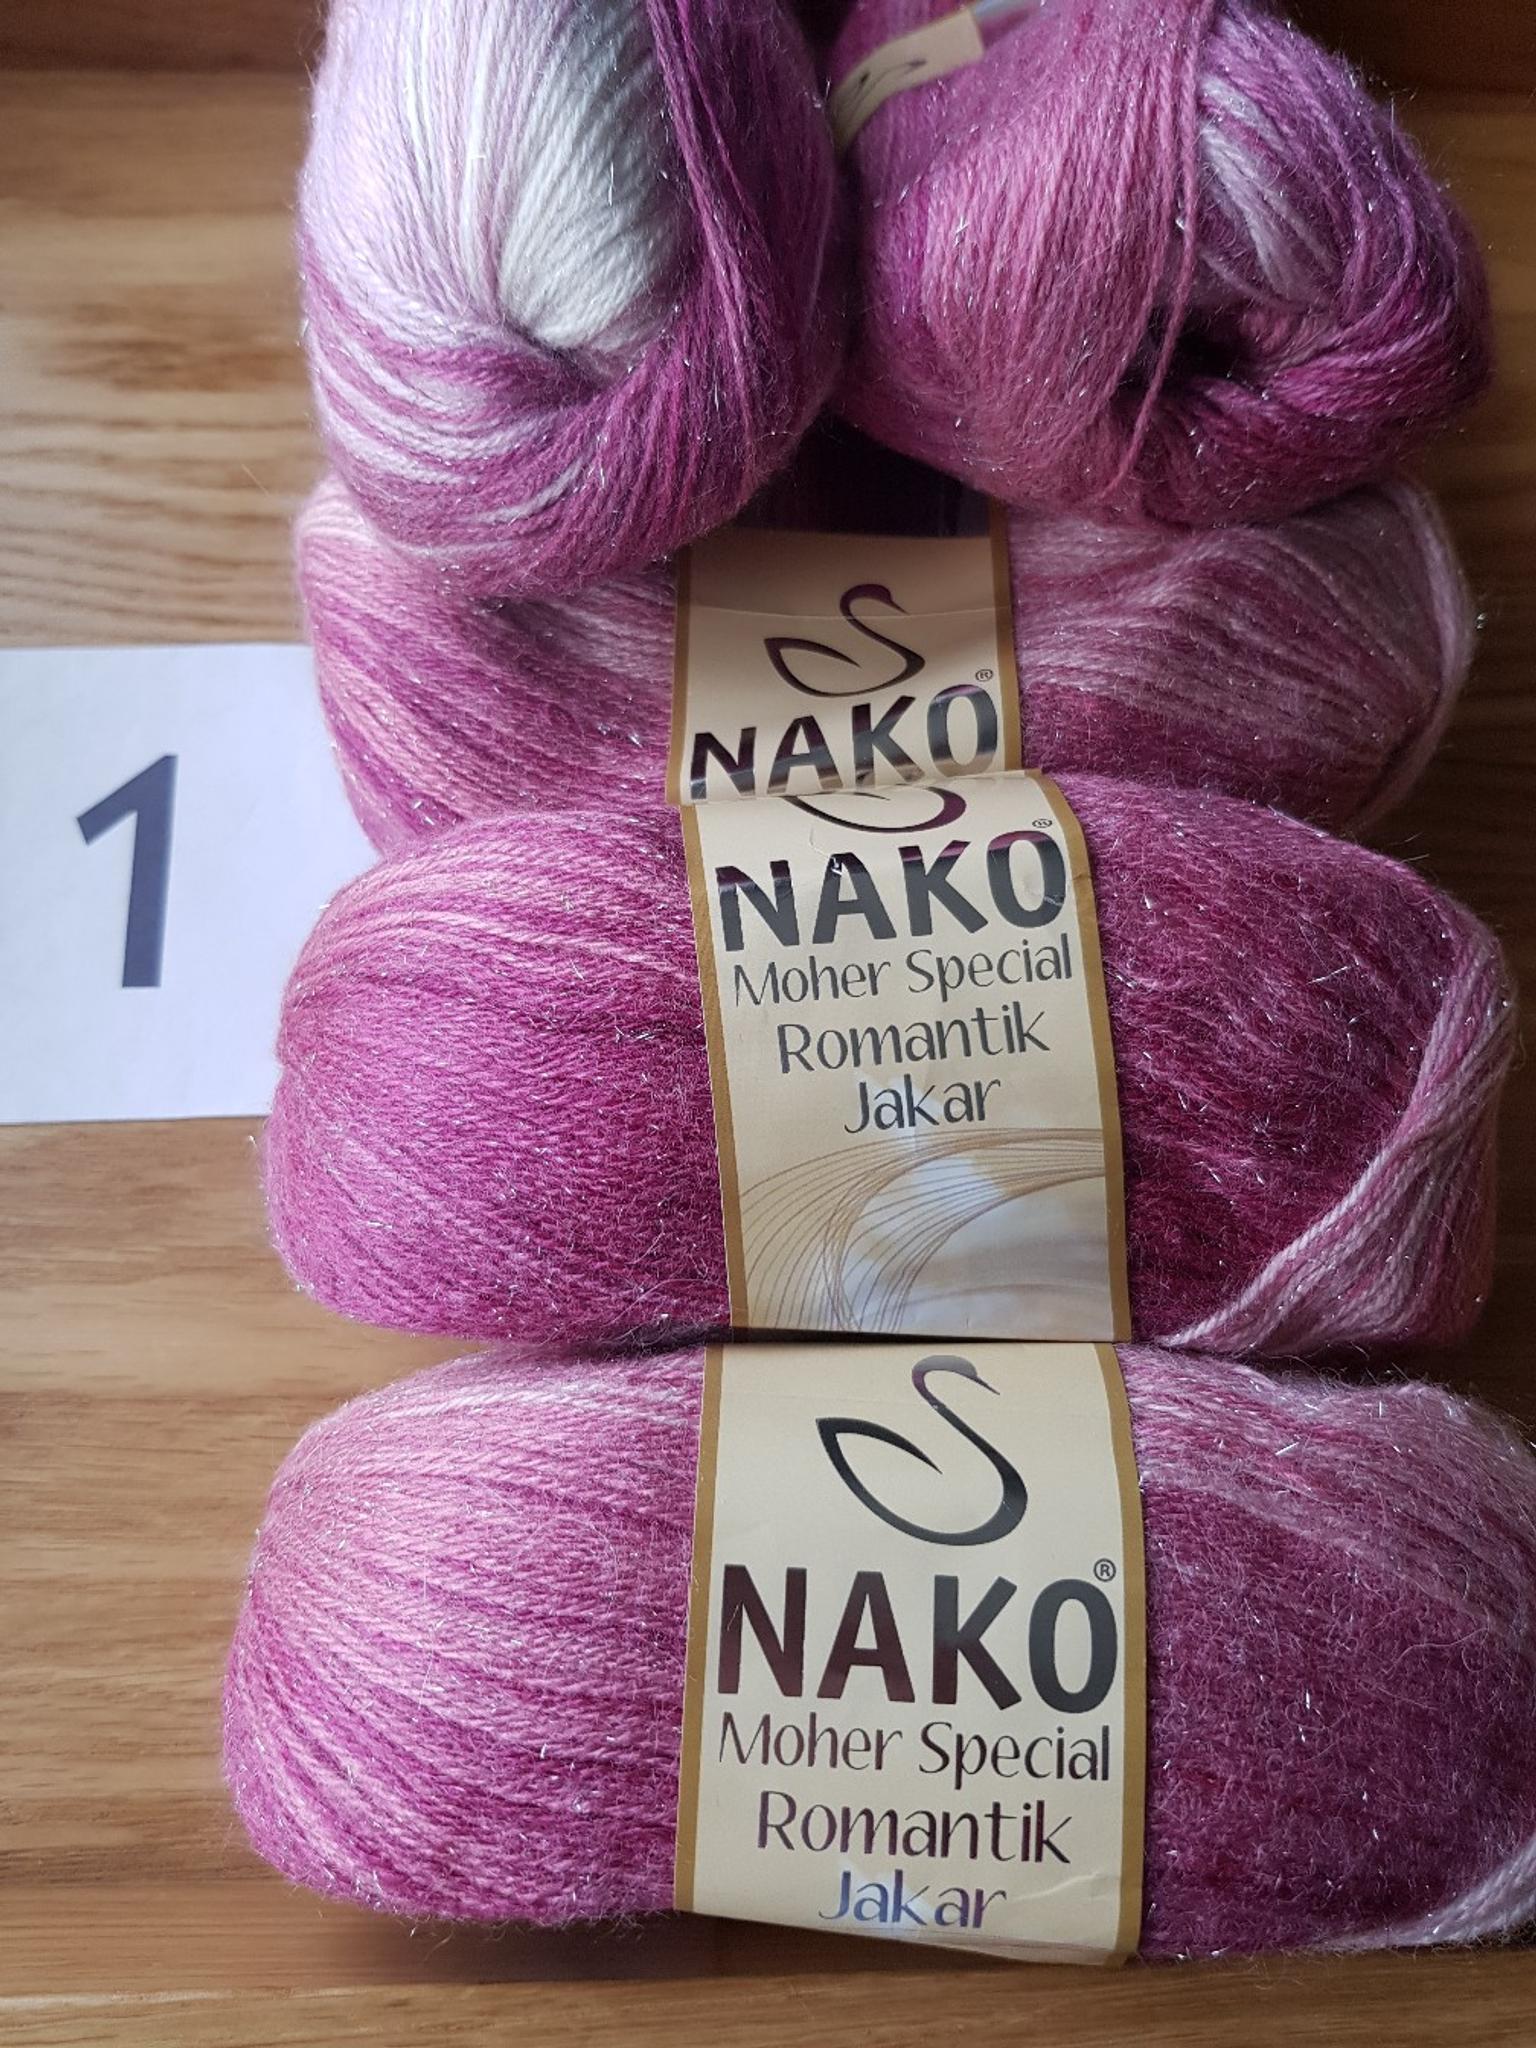 Nako 10% Mohair Special Knitting Yarn/Wool With Sparkly Metallic Thread 500g